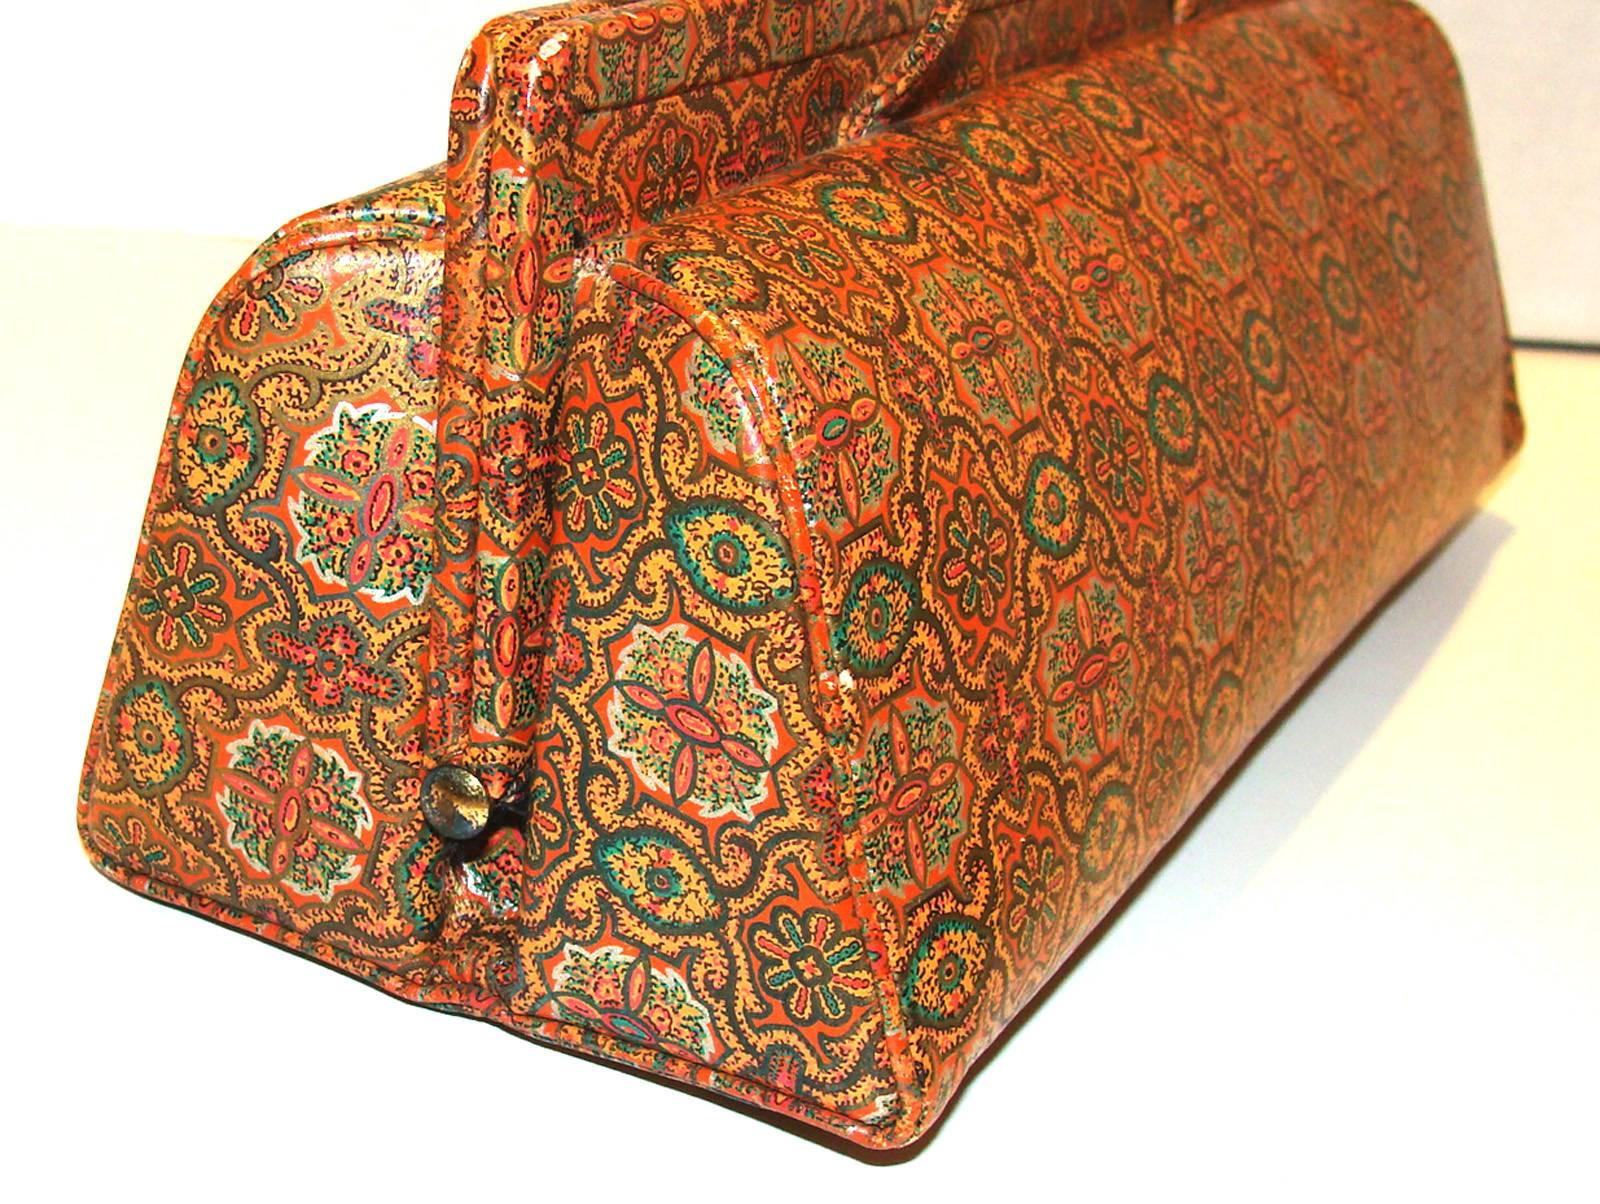 Rare Structured Printed Leather Bag by Holzman FALL In Good Condition For Sale In Lambertville, NJ